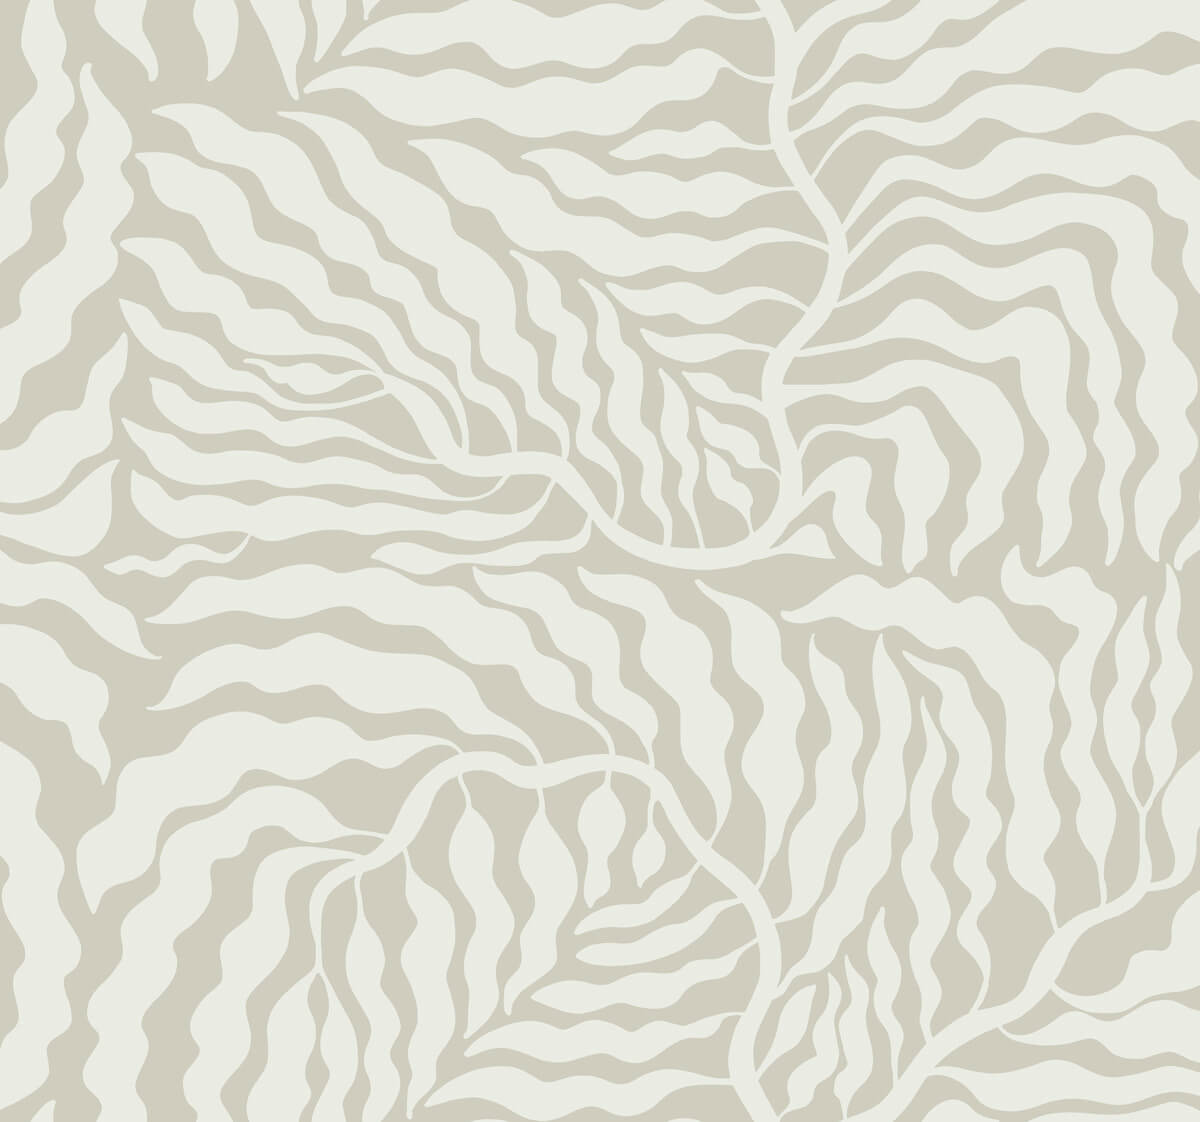 Artistic Abstracts Fern Fronds Wallpaper - Brown